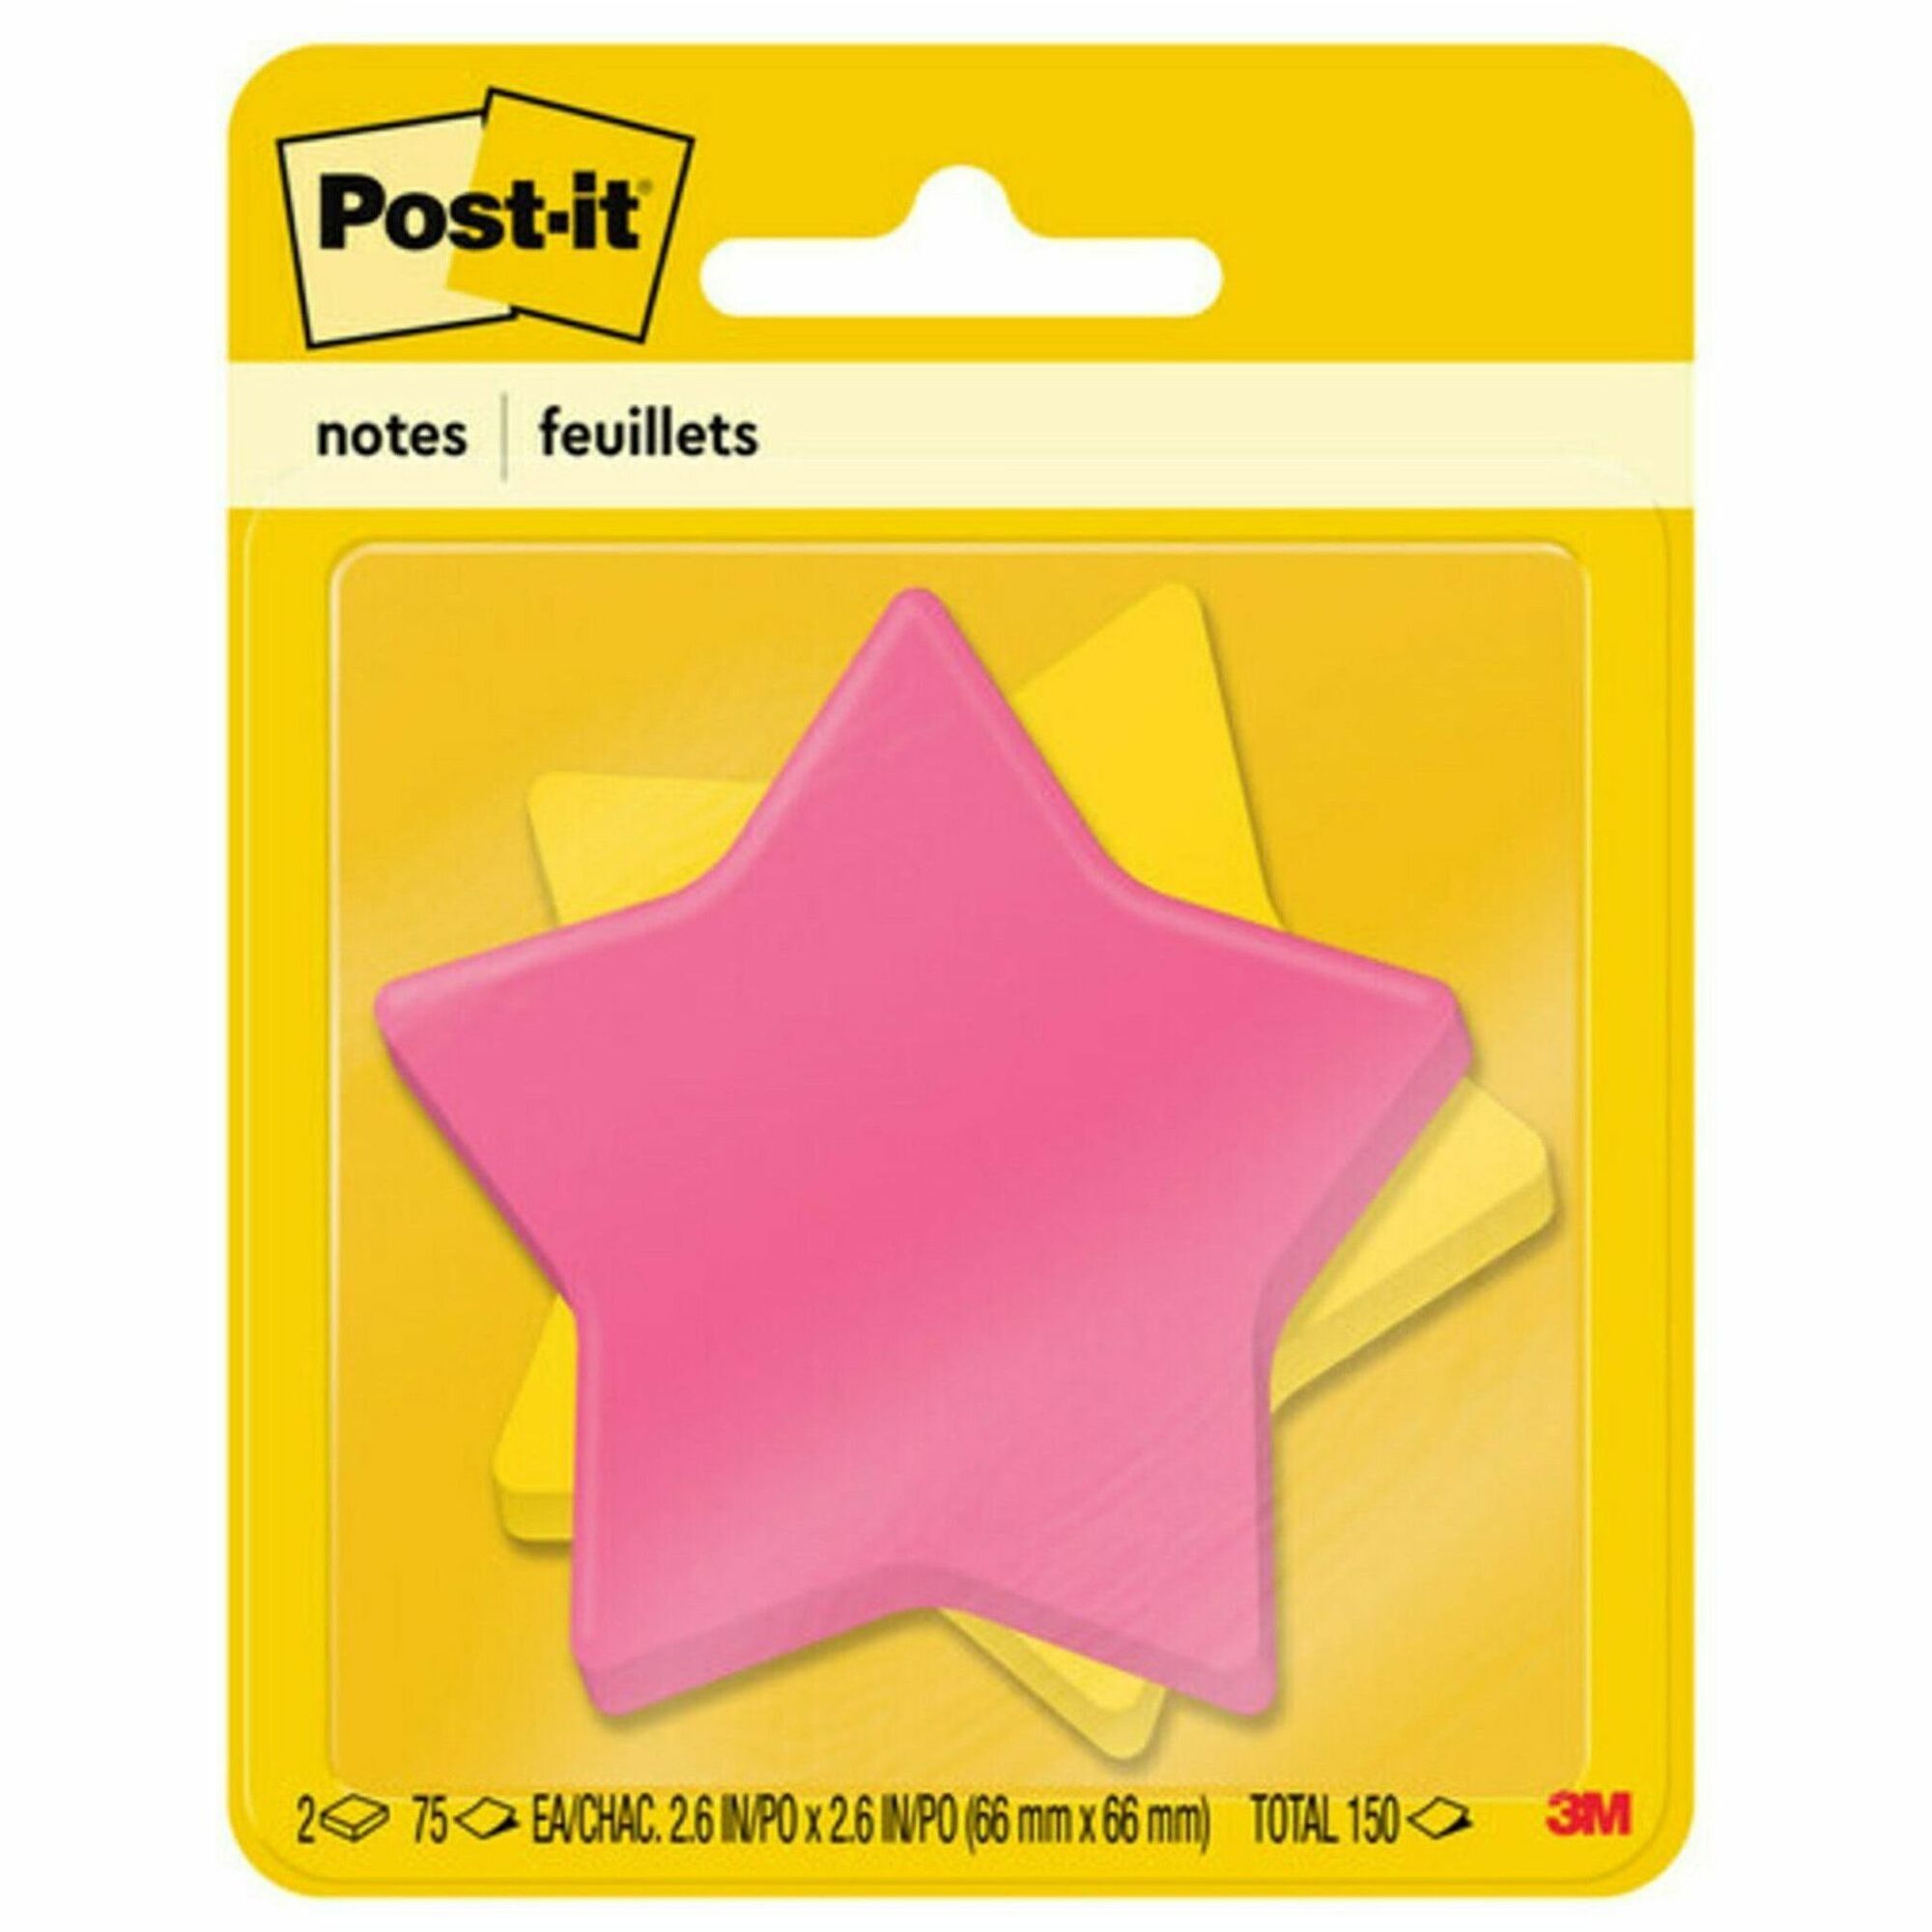 Post-it Super Sticky Die-Cut Notes - 150 - 3" x 3" - Star - 75 Sheets per Pad - Unruled - Yellow, Pink - Self-adhesive - 2 / Pack - 